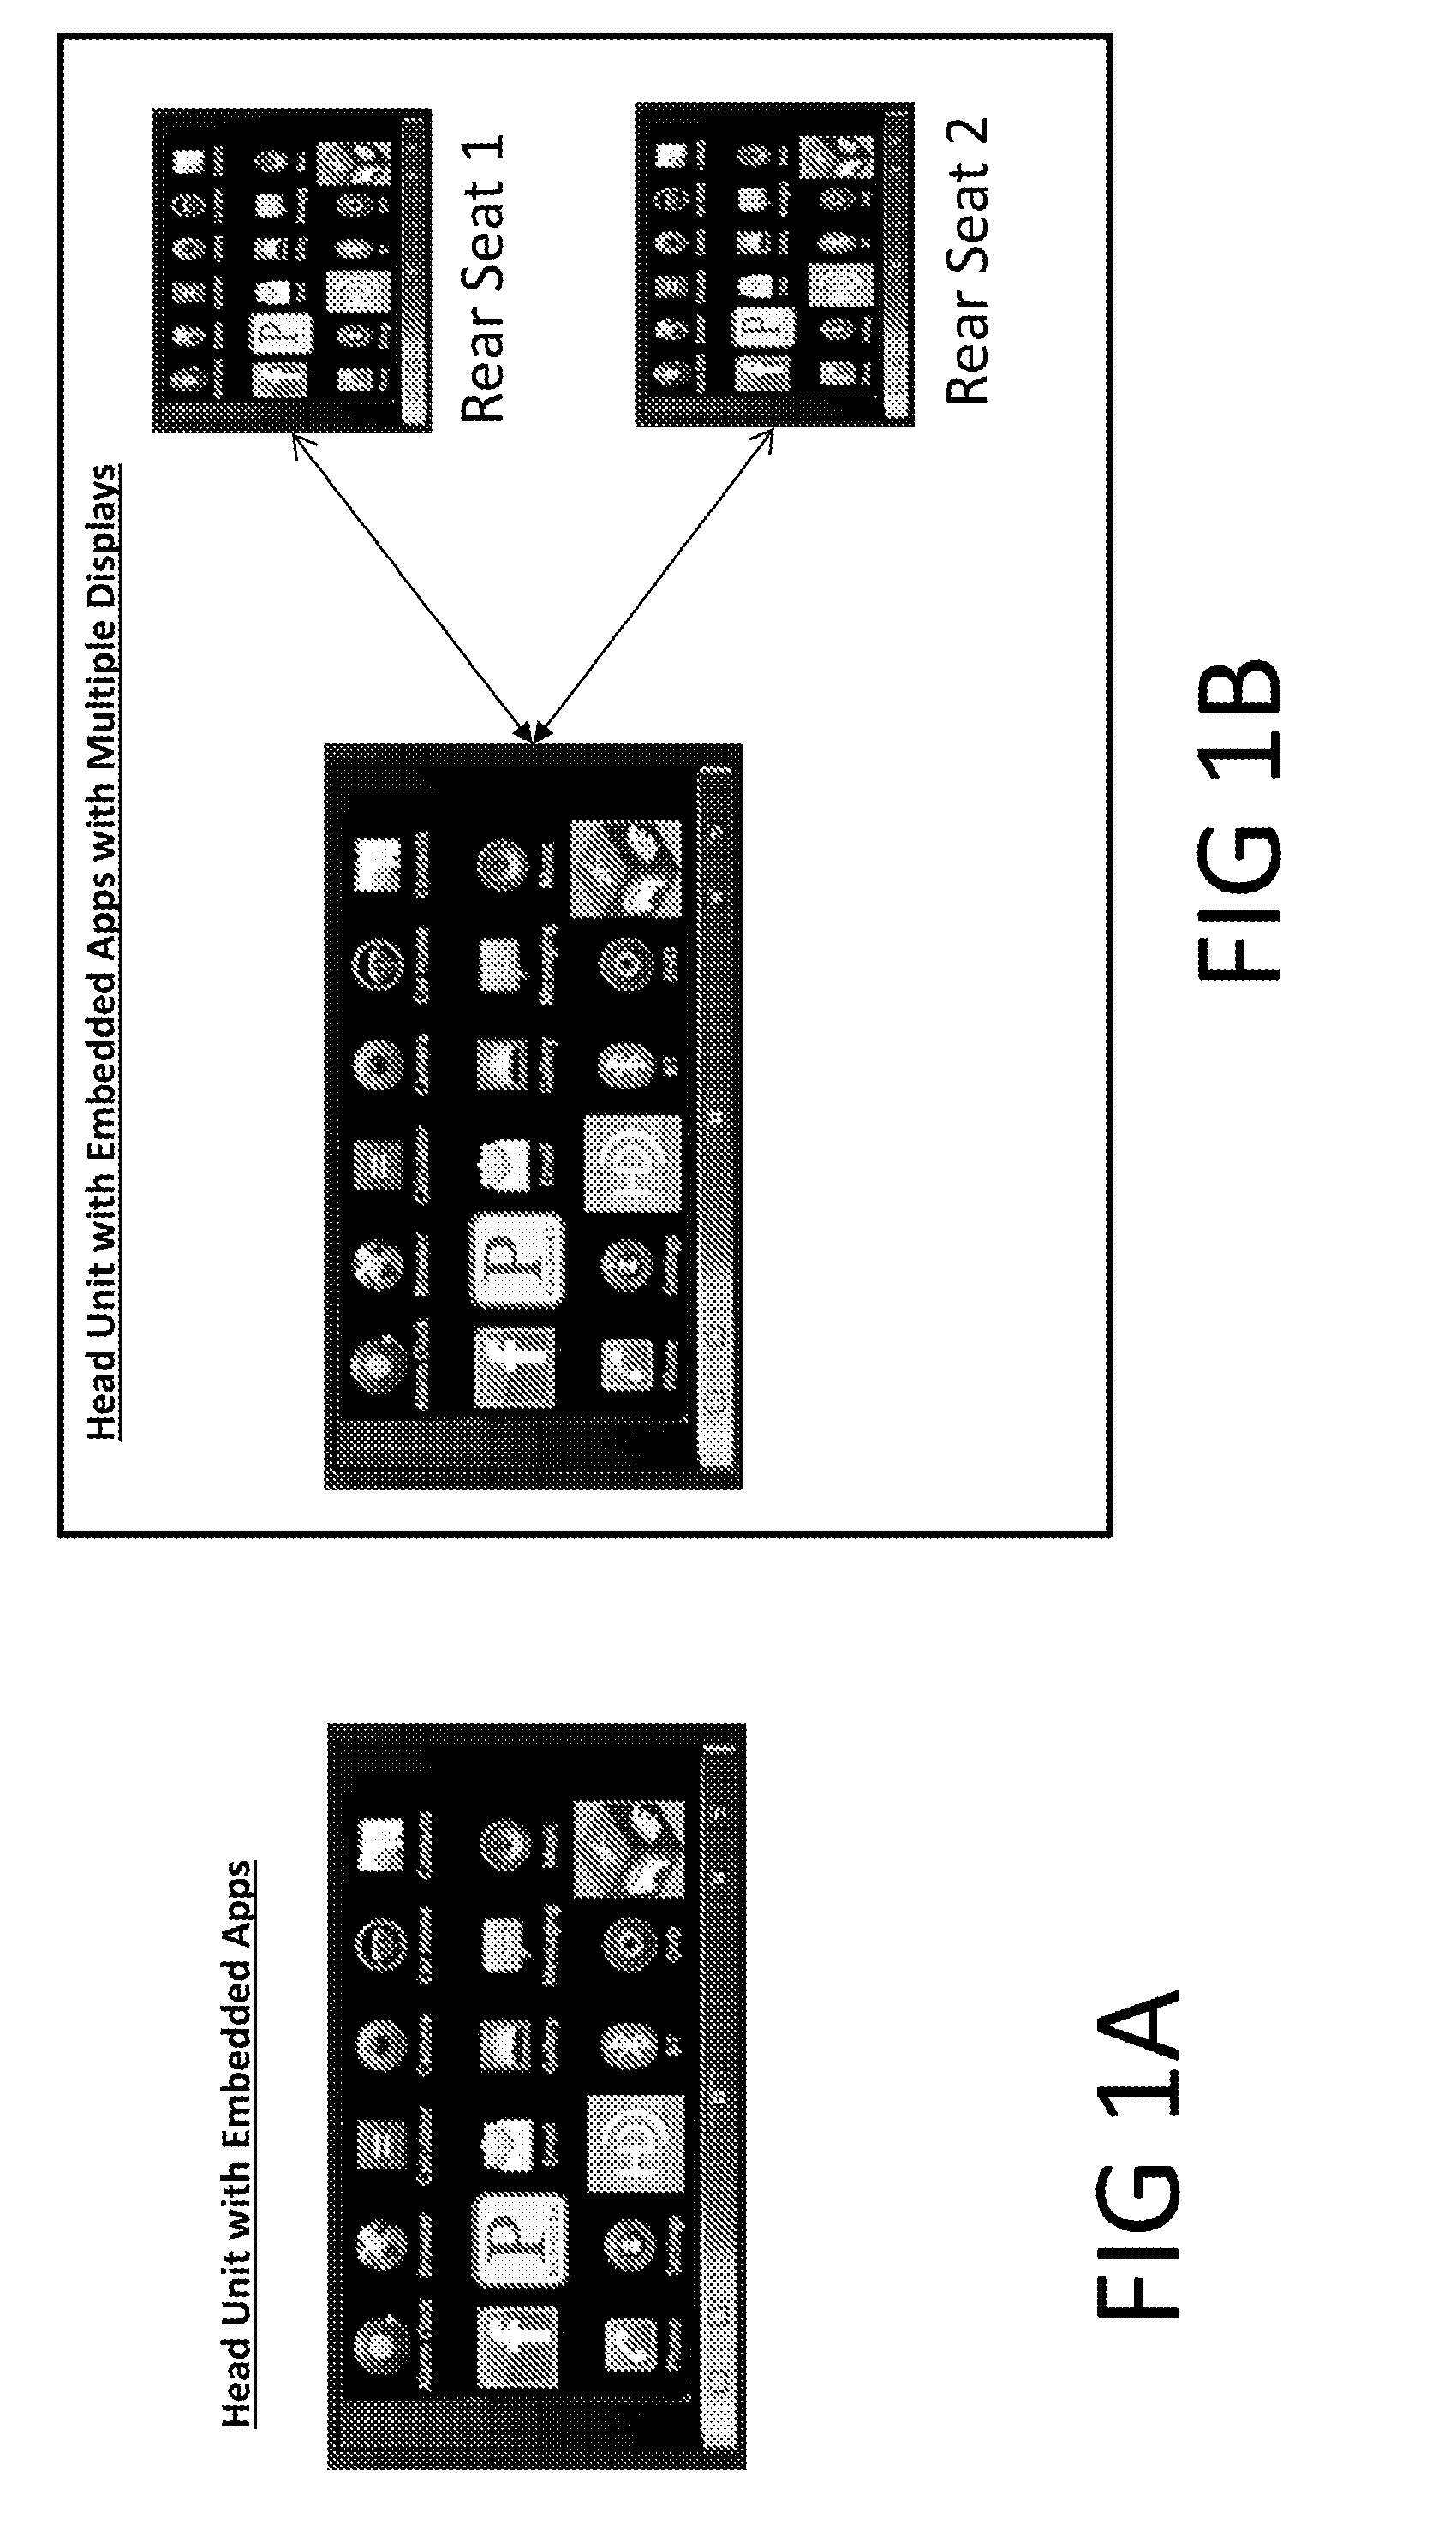 System and Method for Monitoring Apps in a Vehicle to Reduce Driver Distraction